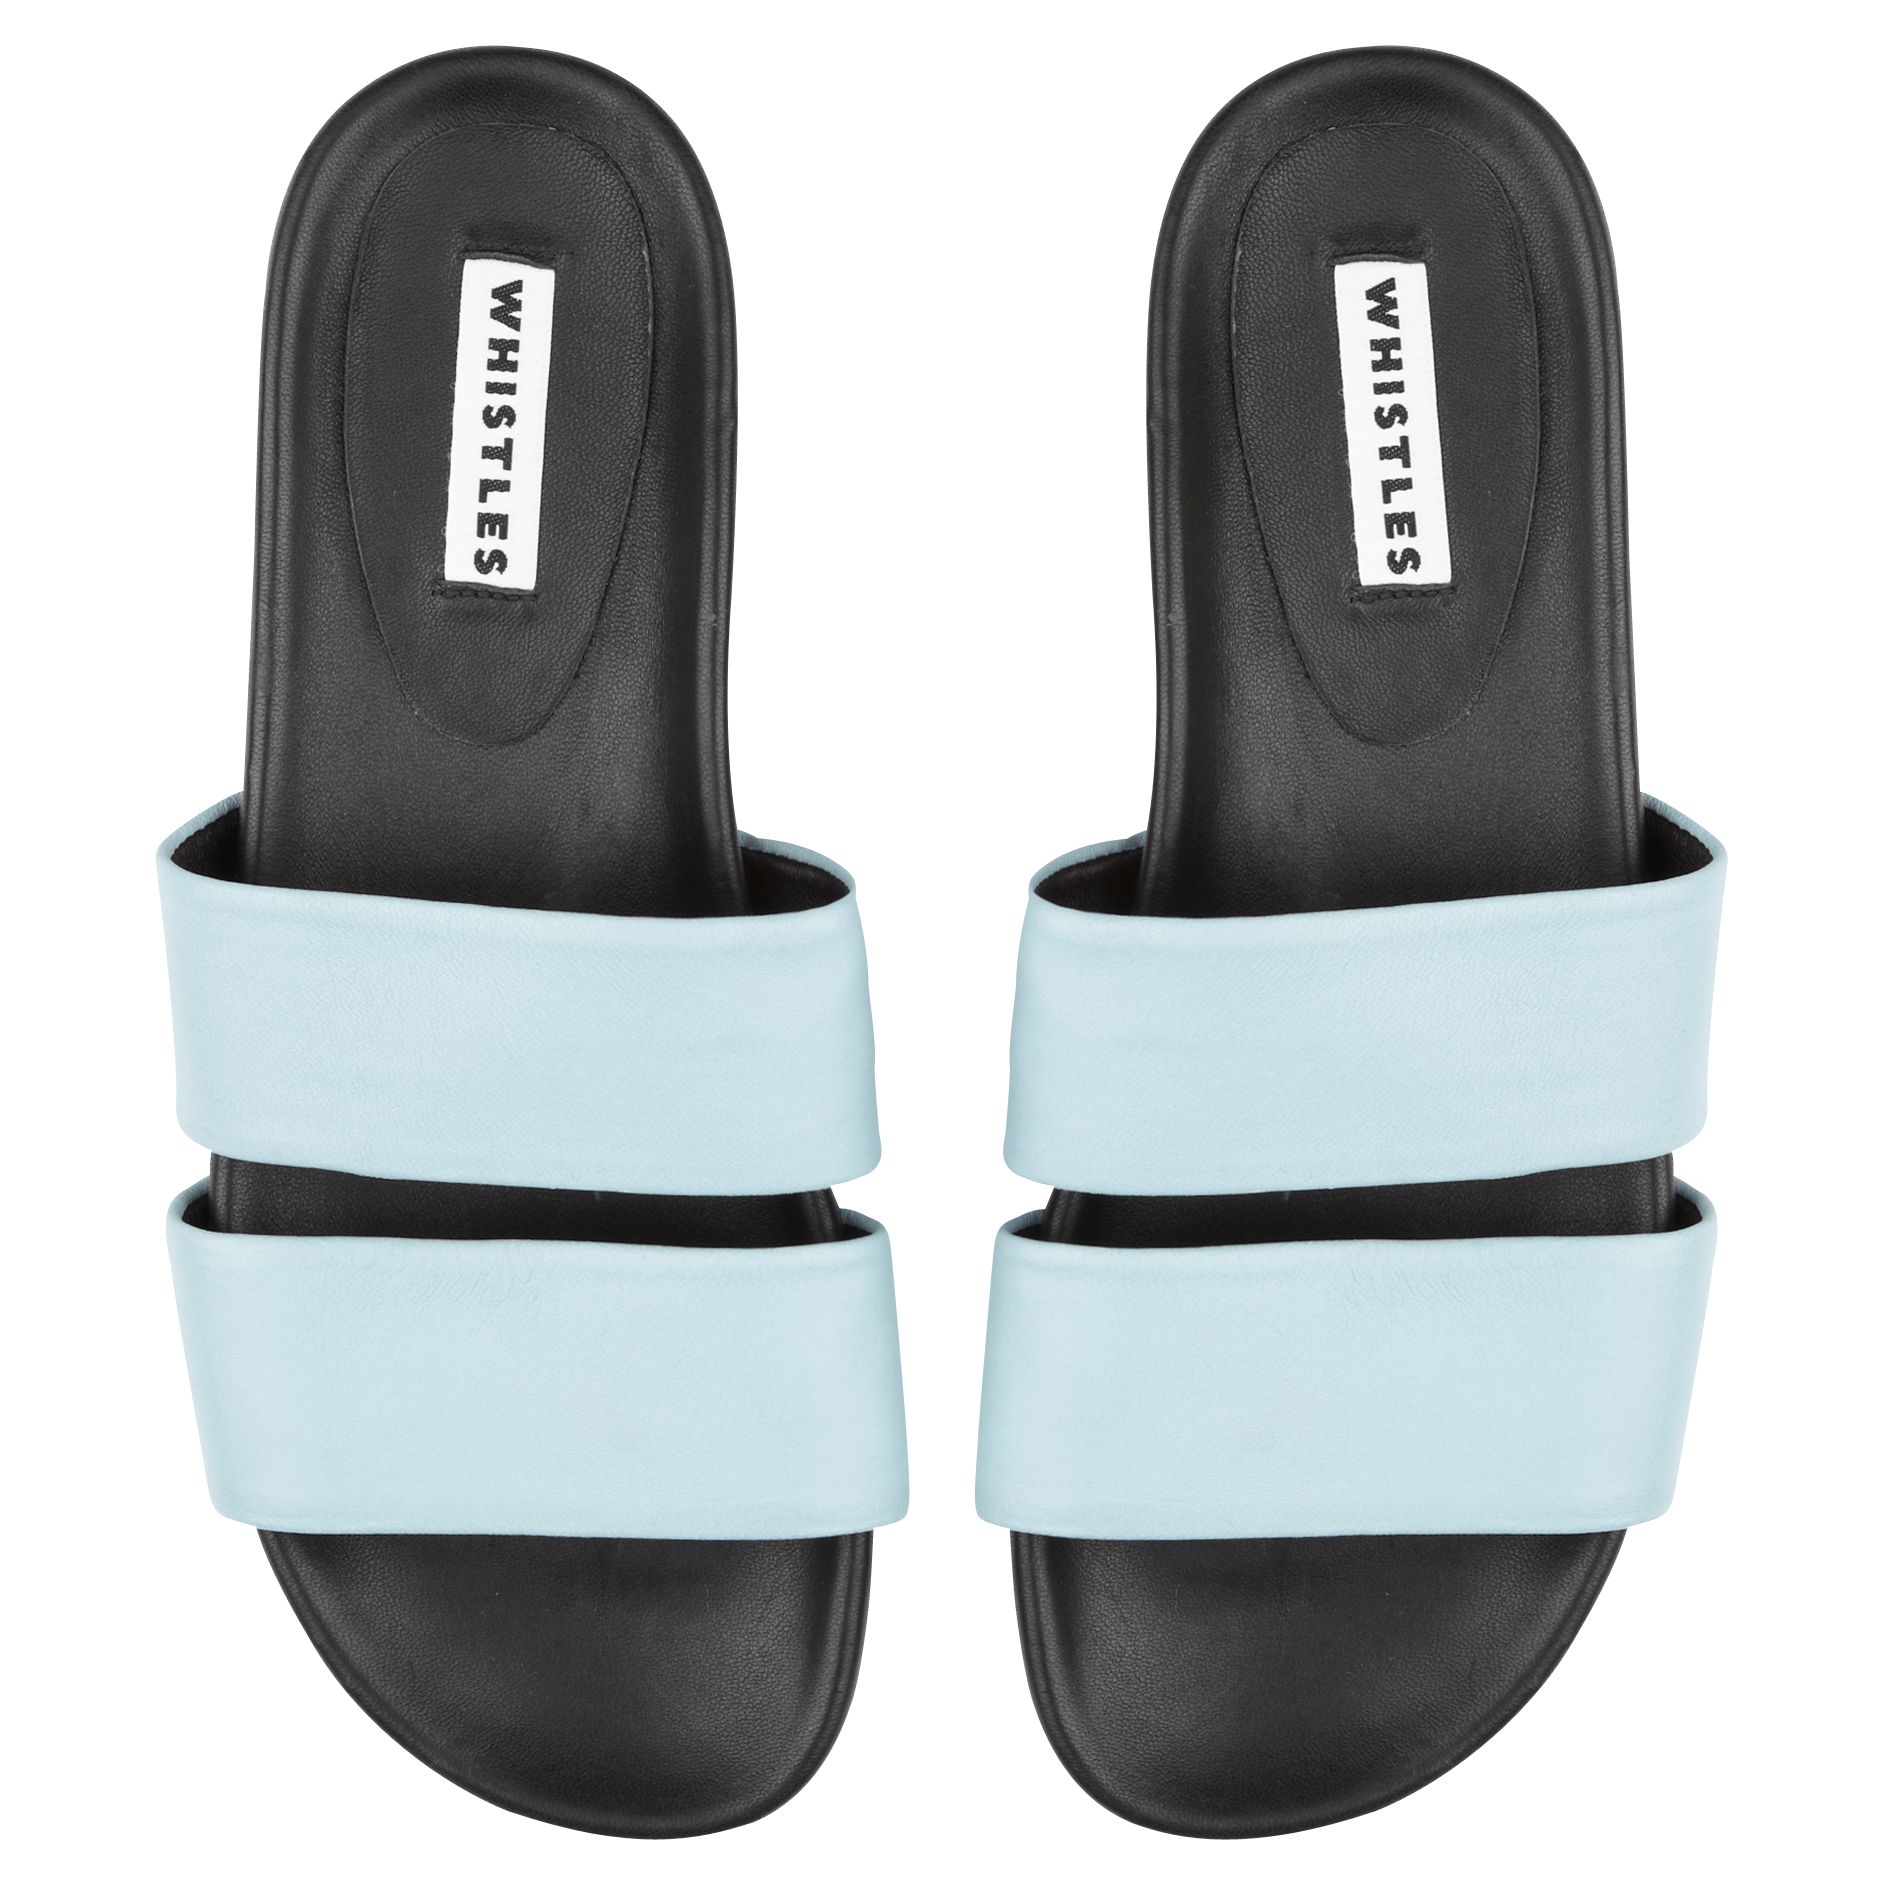 Whistles Maddy Double Band Poolside Sandals at John Lewis & Partners